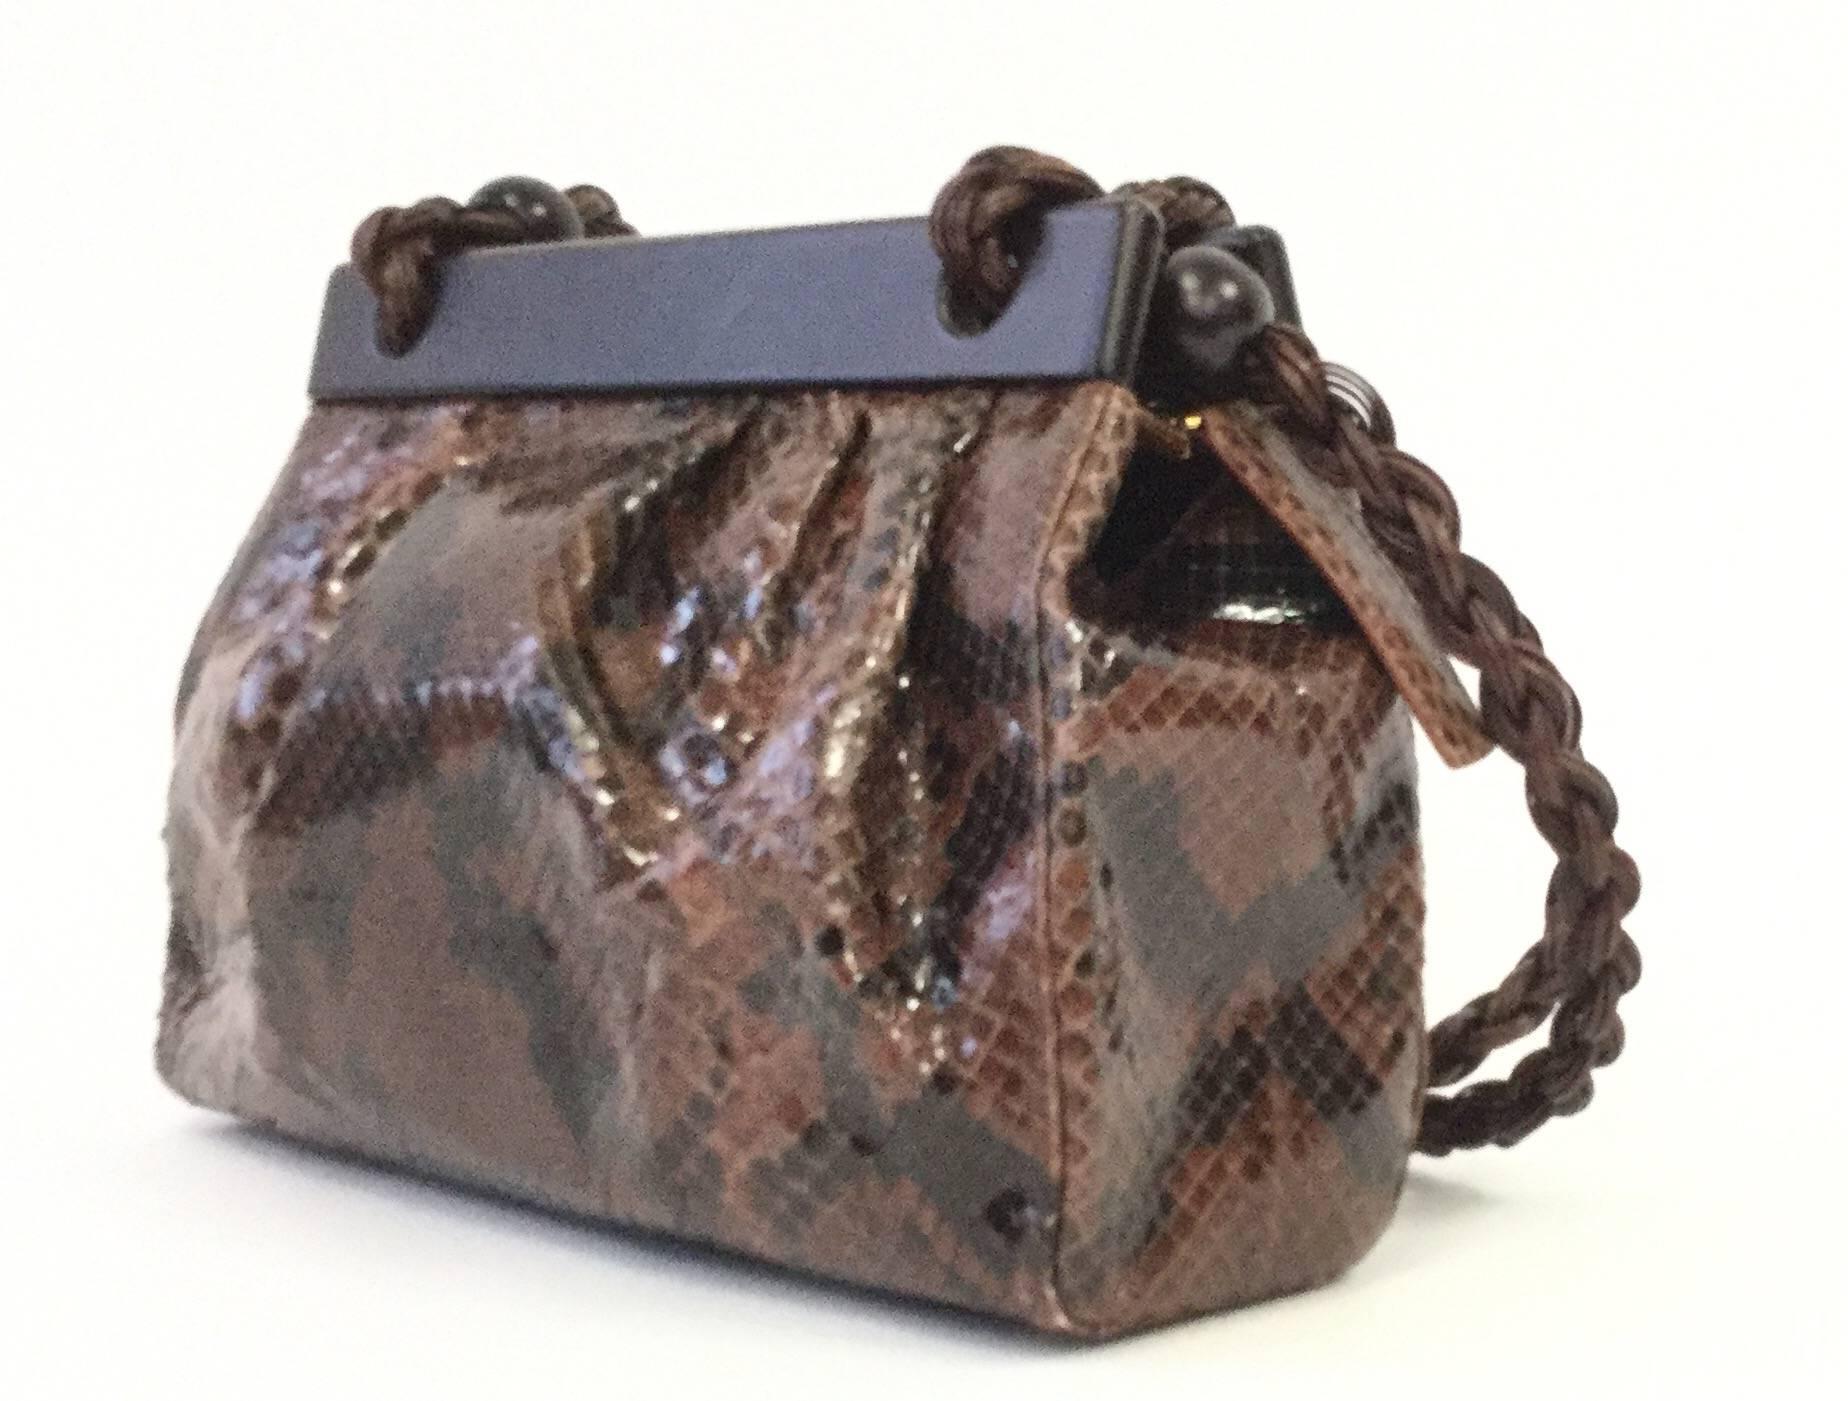 Gorgeous vintage handbag by Suarez New York! This plush bag is composed of a cinnamon brown python leather body with polished wooden clasp-like top and braided leather straps with wooden ball accents. The purse has our gold-tone metal feet and a